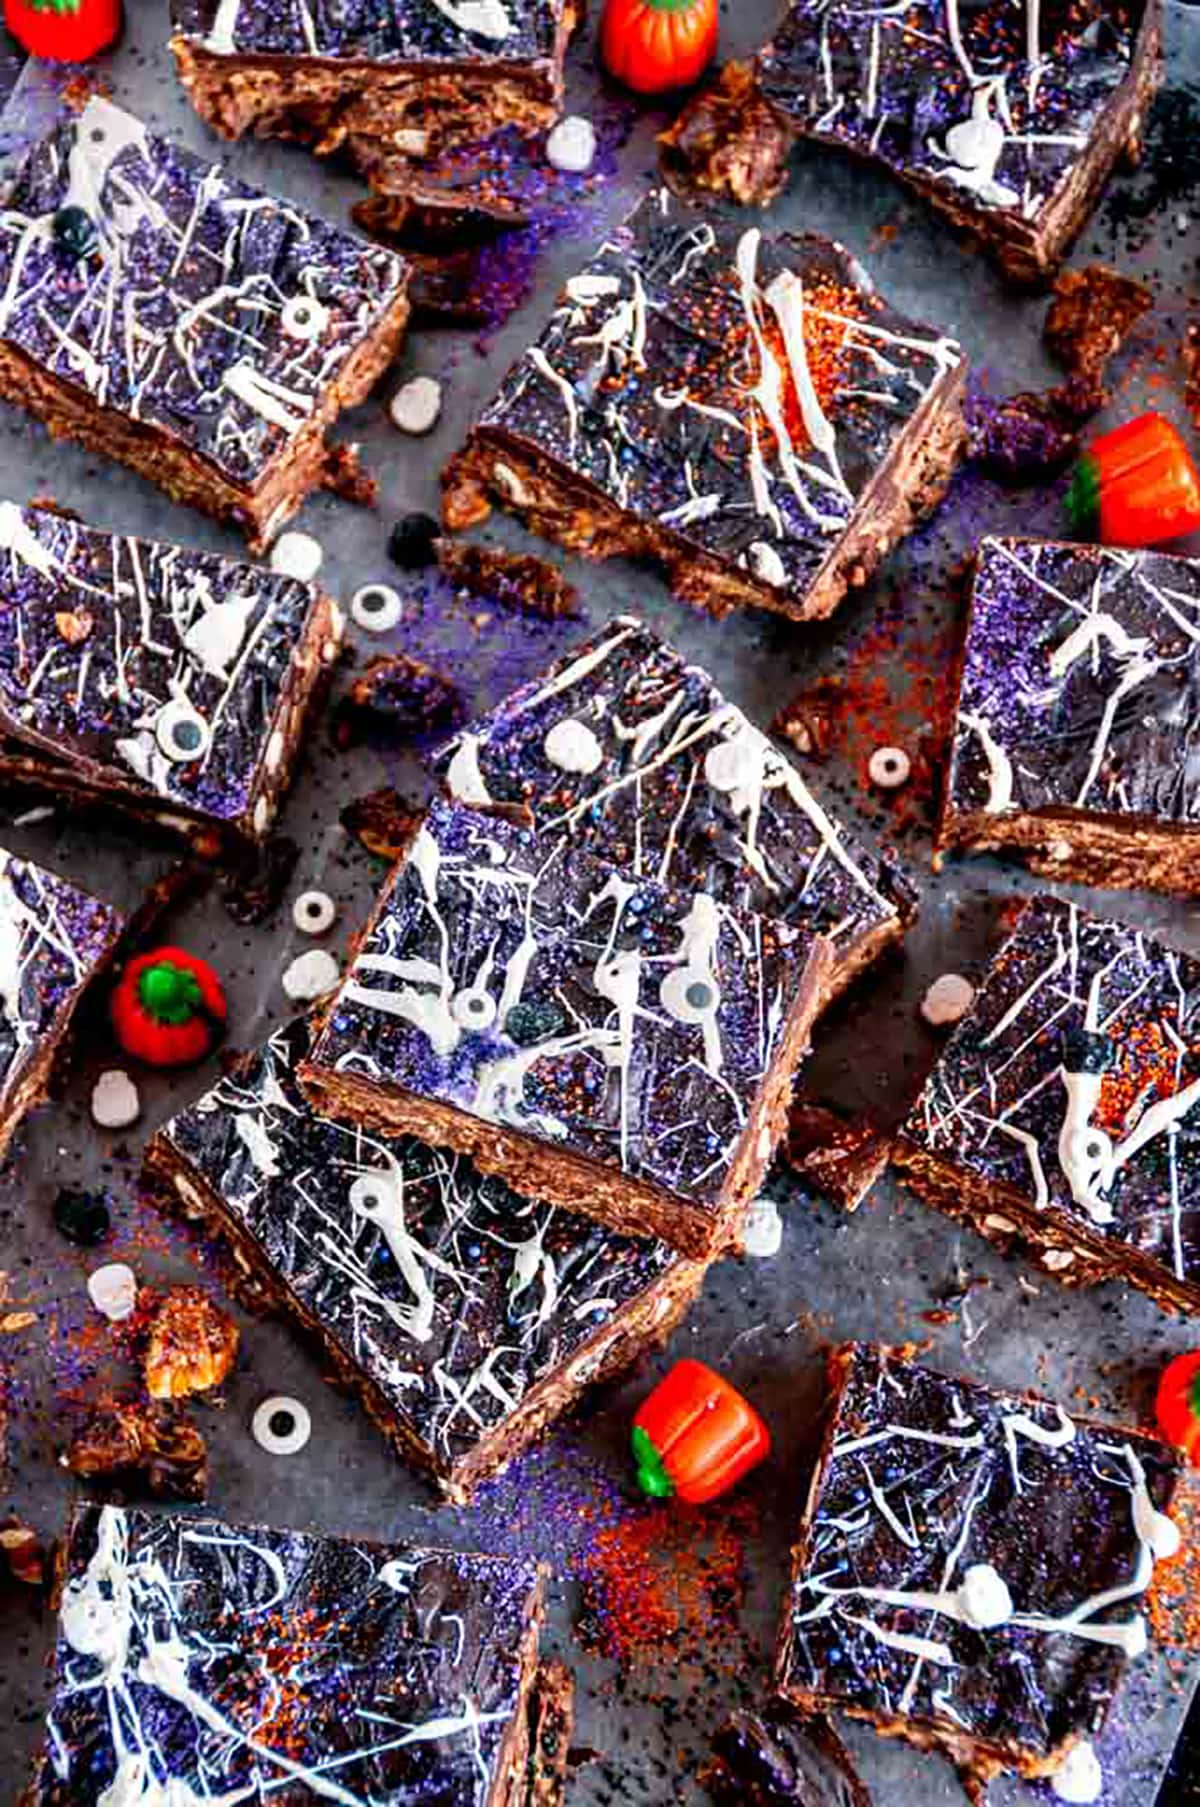 No Bake Chocolate Peanut Butter Pretzel Bars with Halloween sprinkles and candy pumpkins on parchment paper